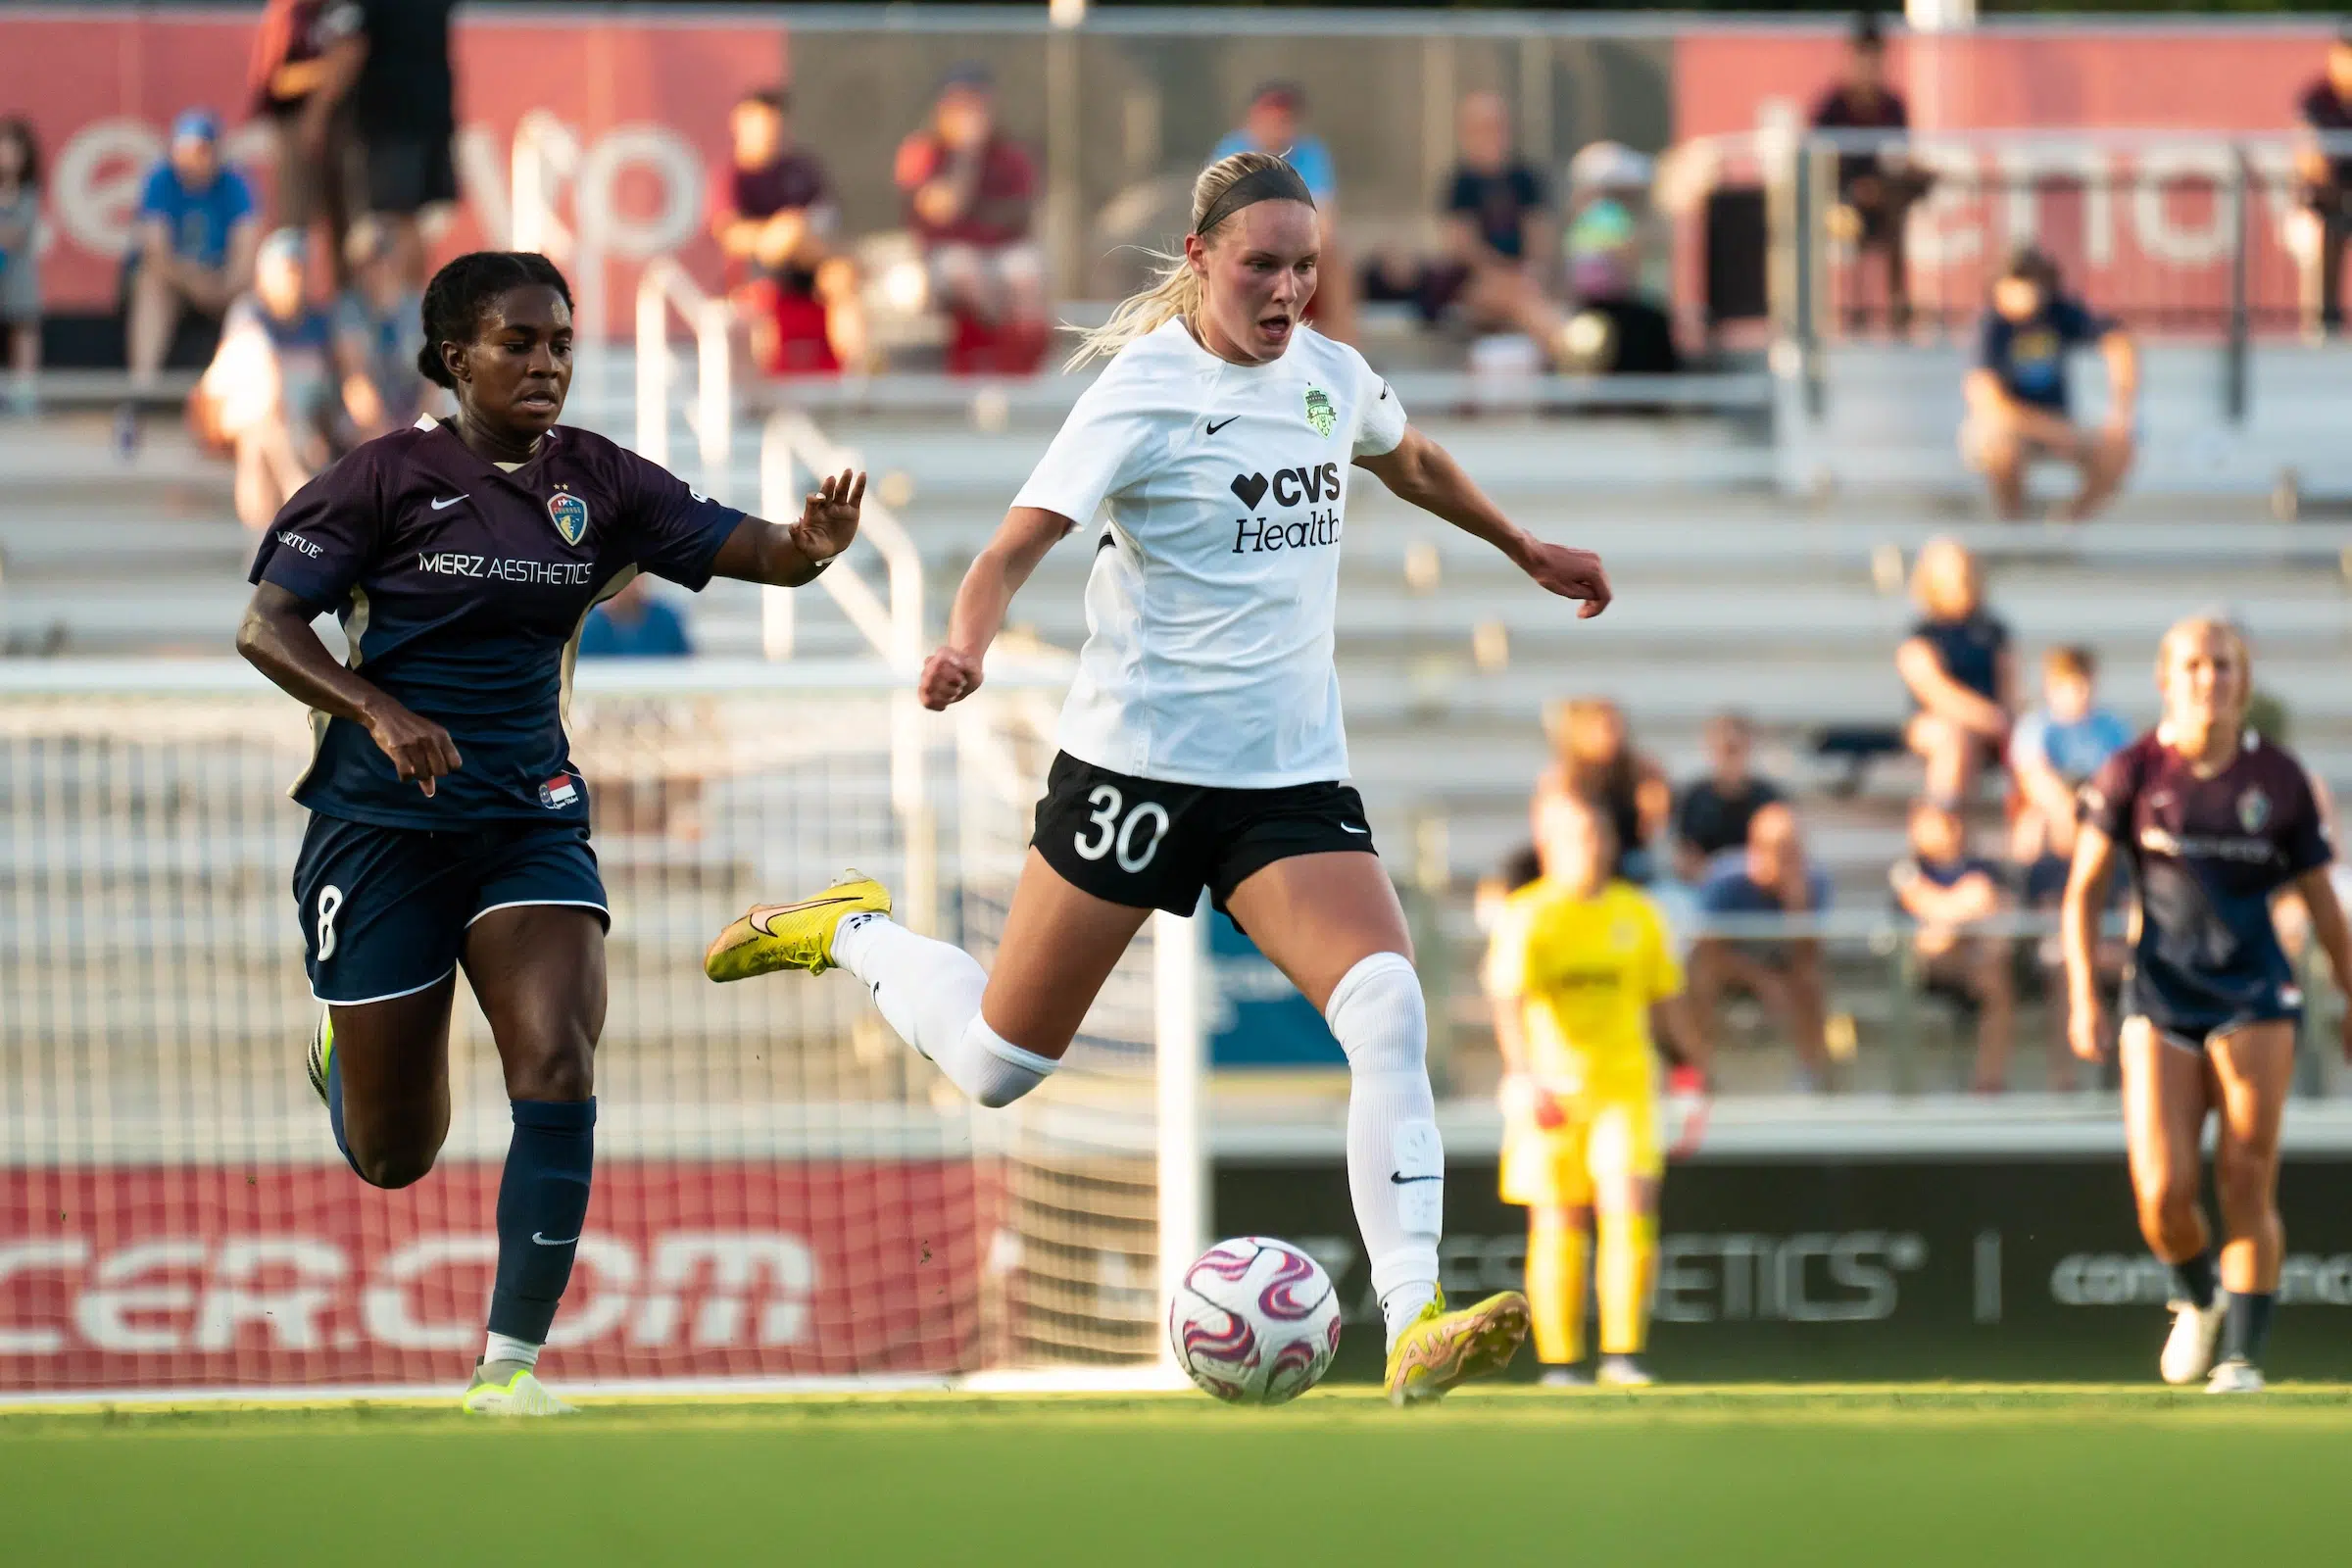 A soccer player in a white top, black shorts and white socks goes to kick a ball as a defender tries to chase her down on the soccer field.